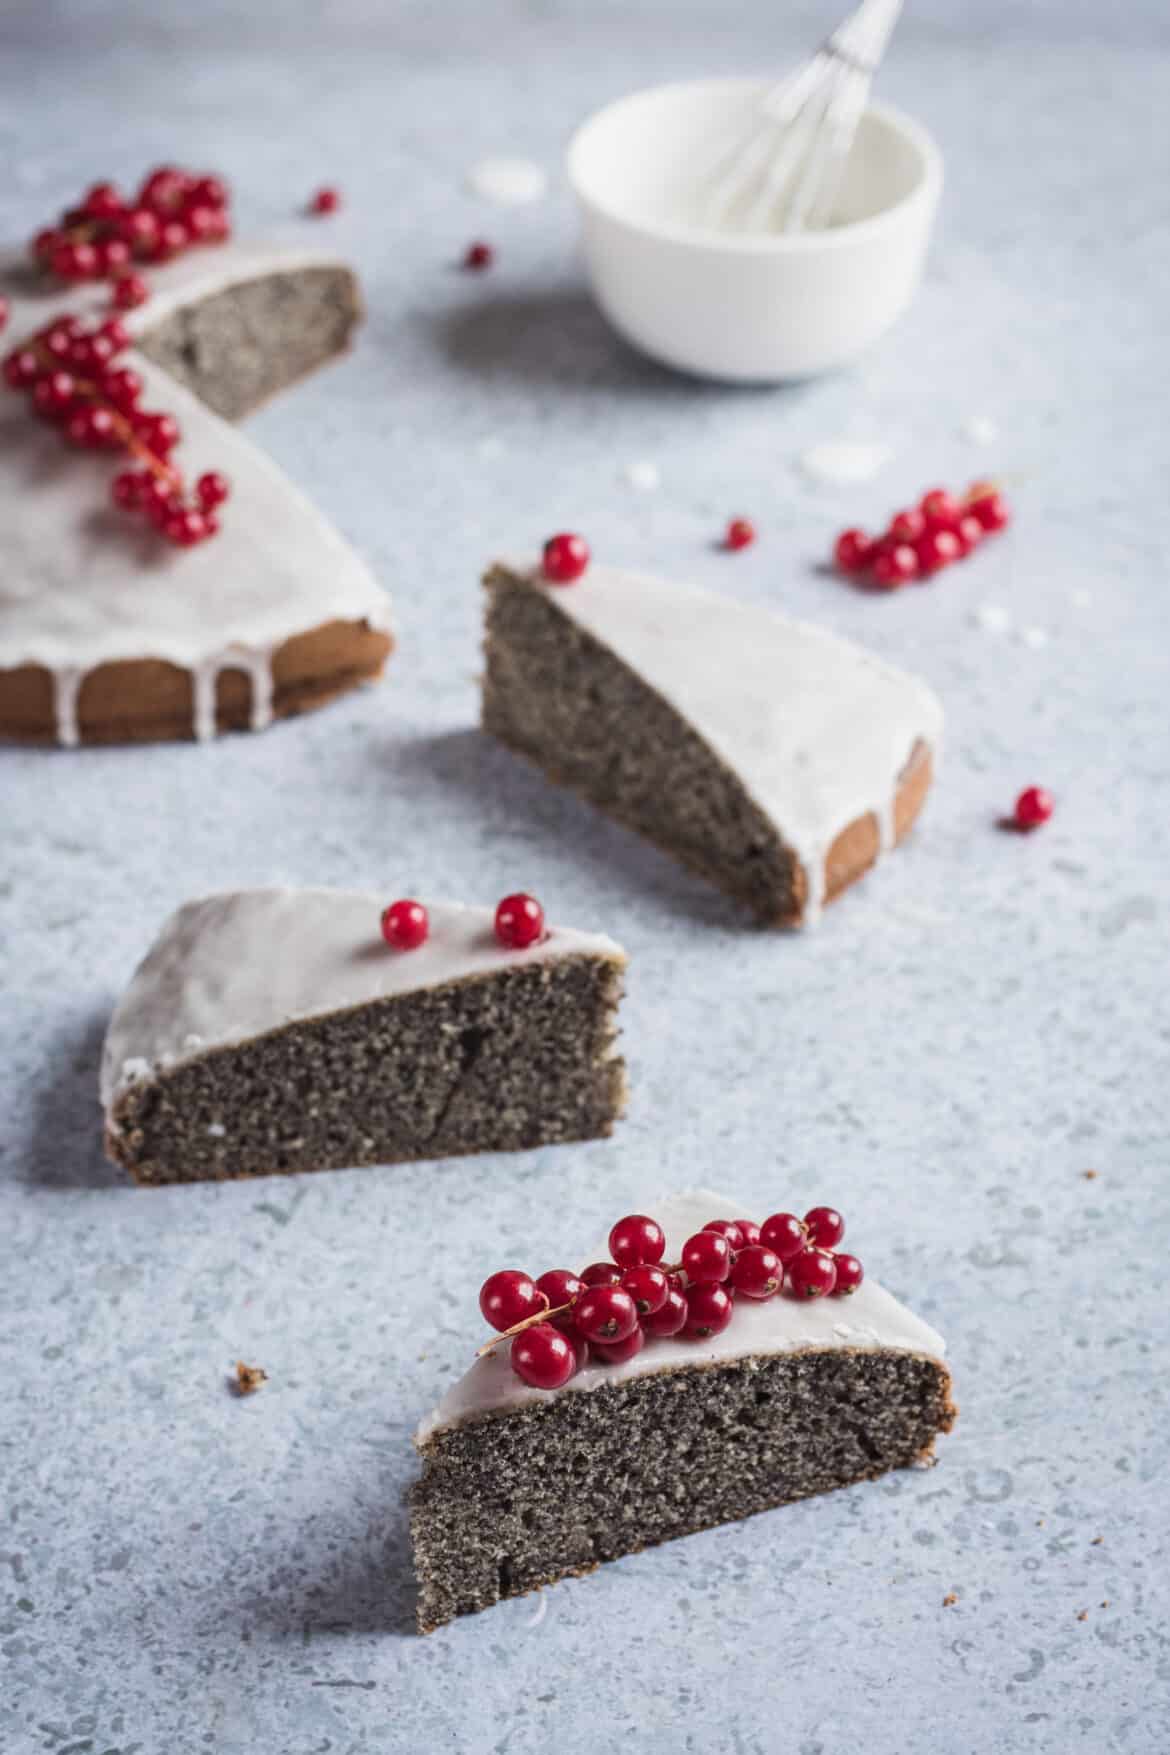 So do you fancy trying something Czech with poppy seed? Makovec or the poppy seed cake is a good candidate as it is trivial and delicious!